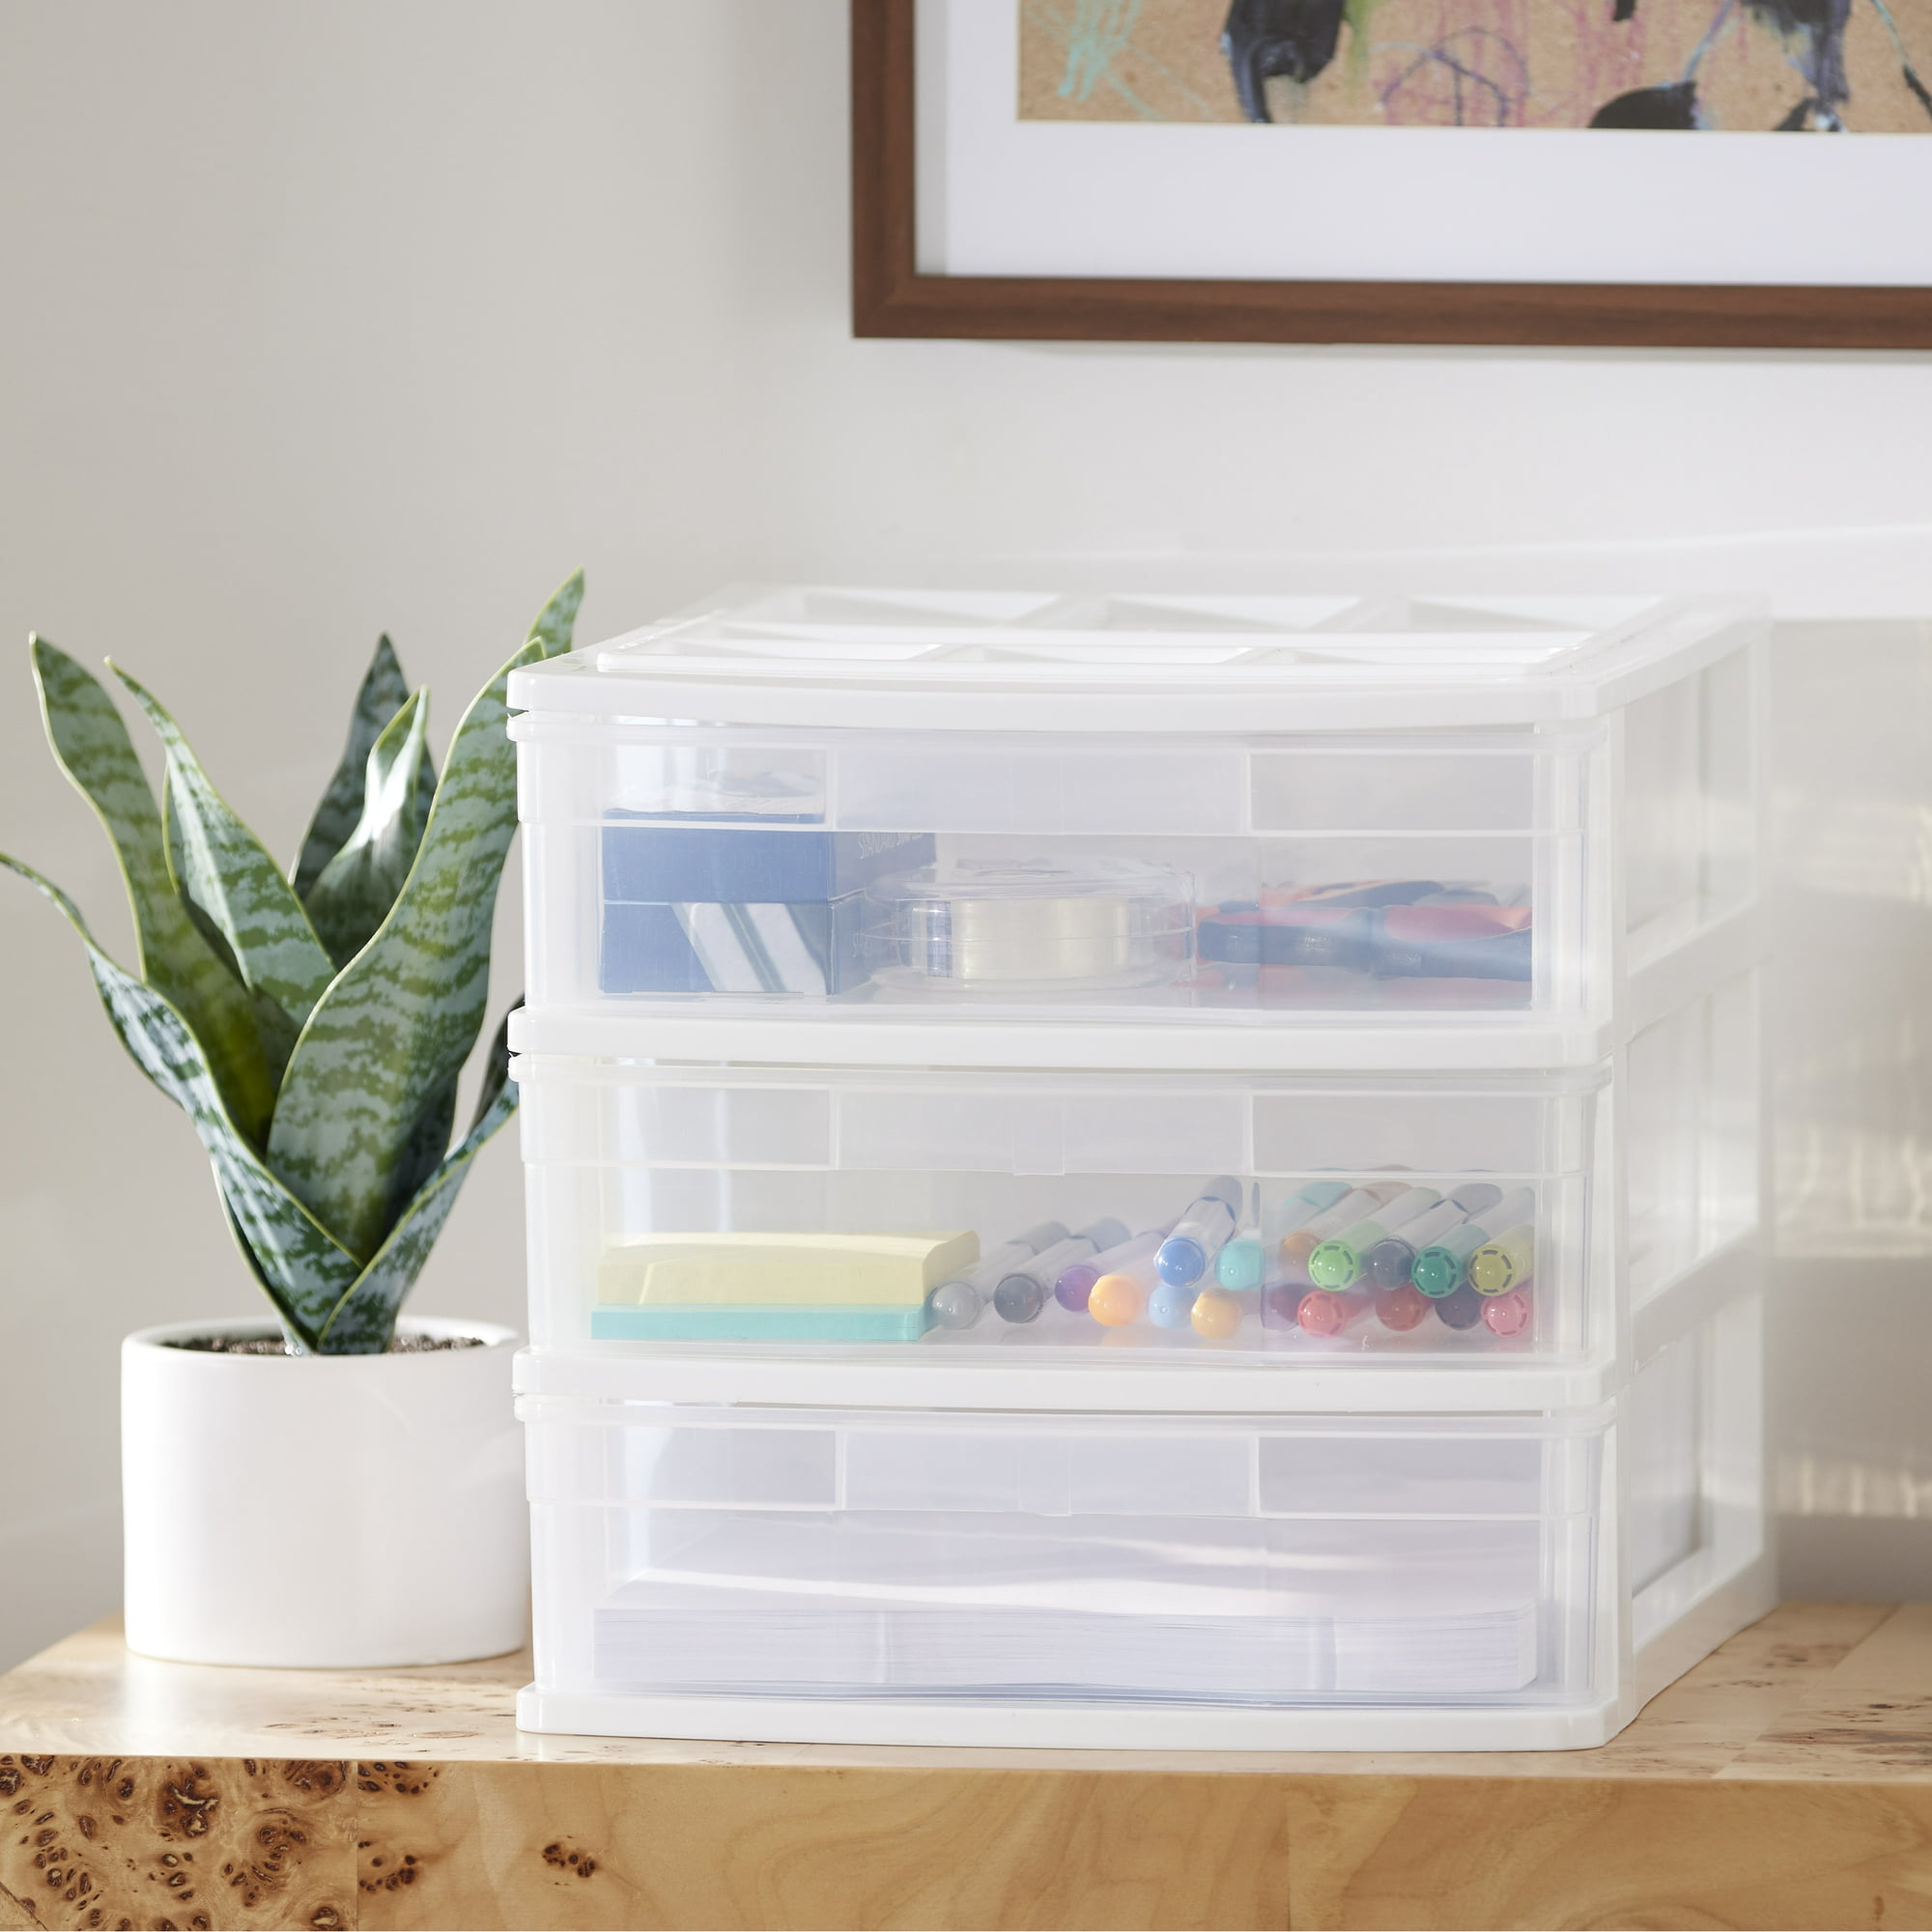  Ciieeo Small Desk Organizer with Drawers 3-Drawer